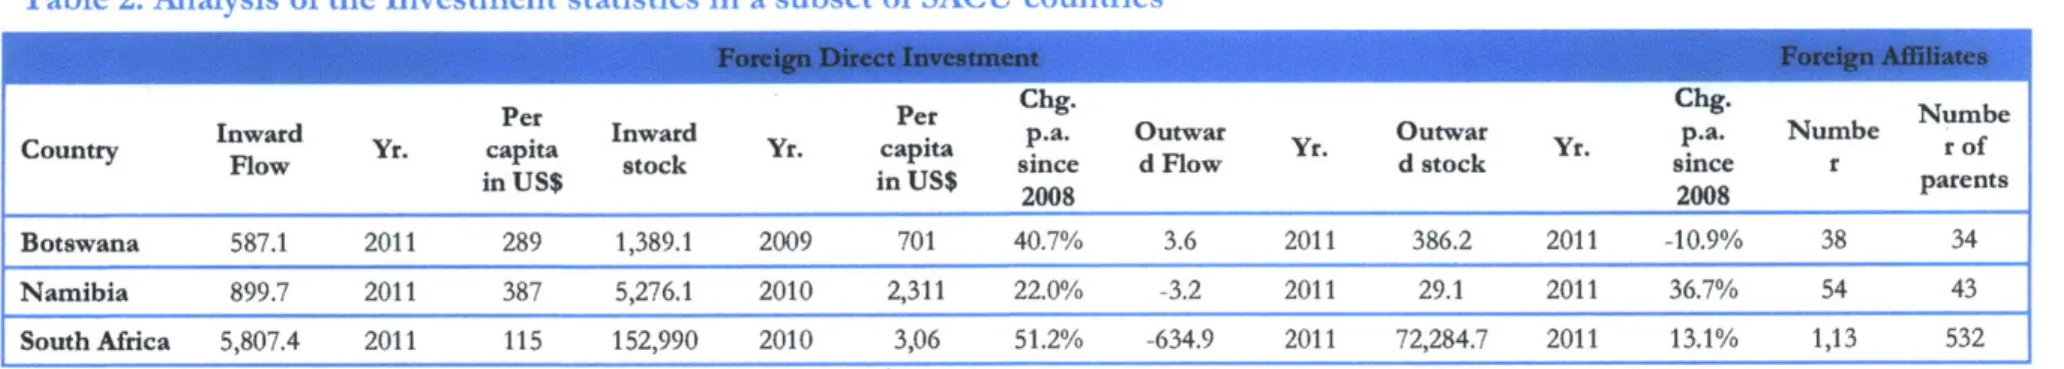 Table  2.  Analysis  of the Investment  statistics  in  a  subset  of SACU  countries